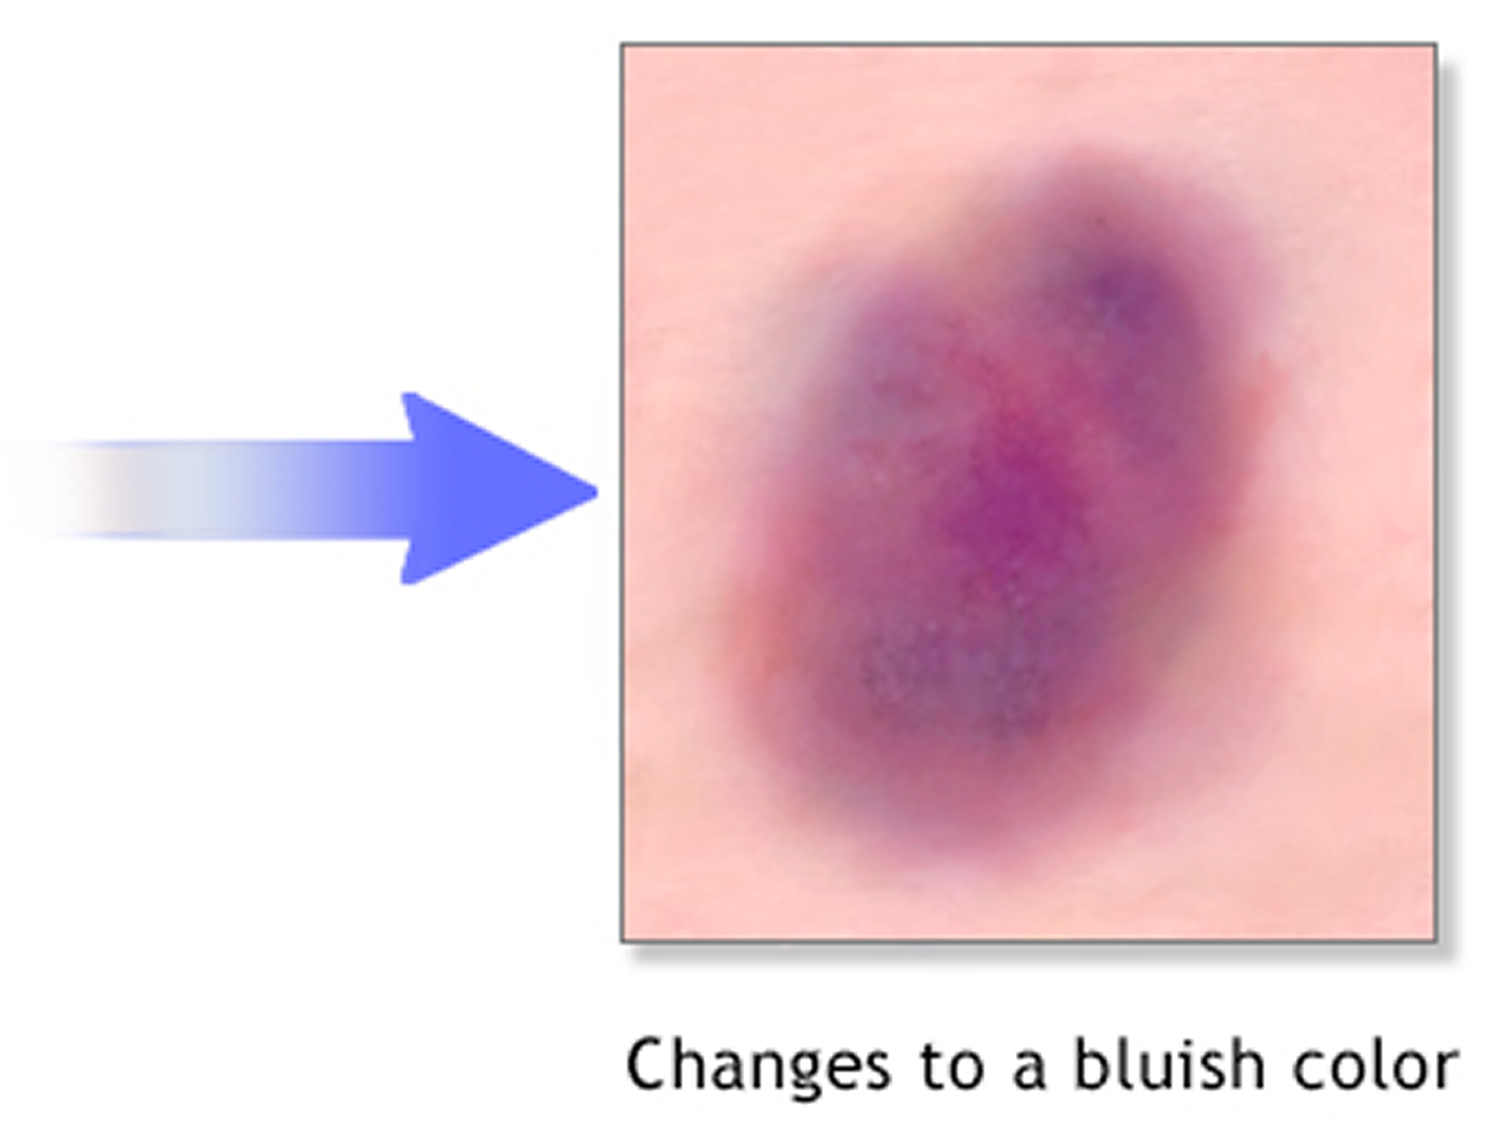 bruise - causes, diagnosis, treatment, home remedy and healing time